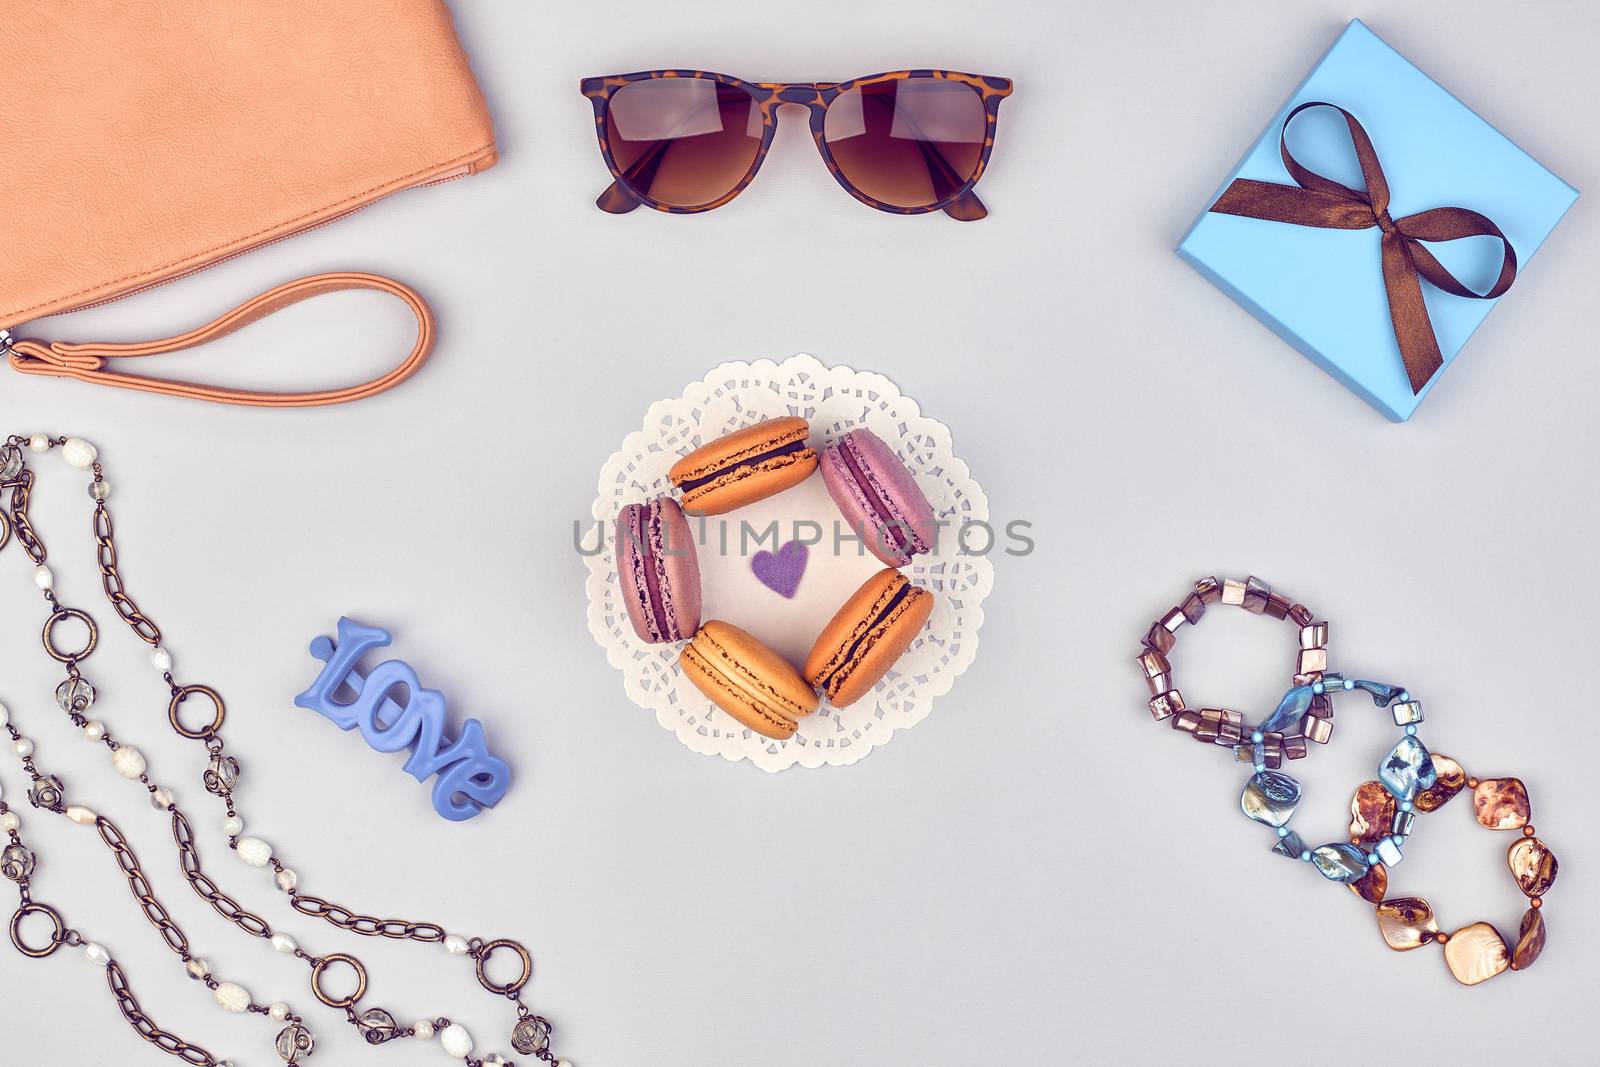 Overhead outfit Fashion clothes set, macarons french dessert, accessories. Glamor creative, love, clutch sunglasses gift box, necklace, bracelet. Unusual modern party essentials.Top view,background